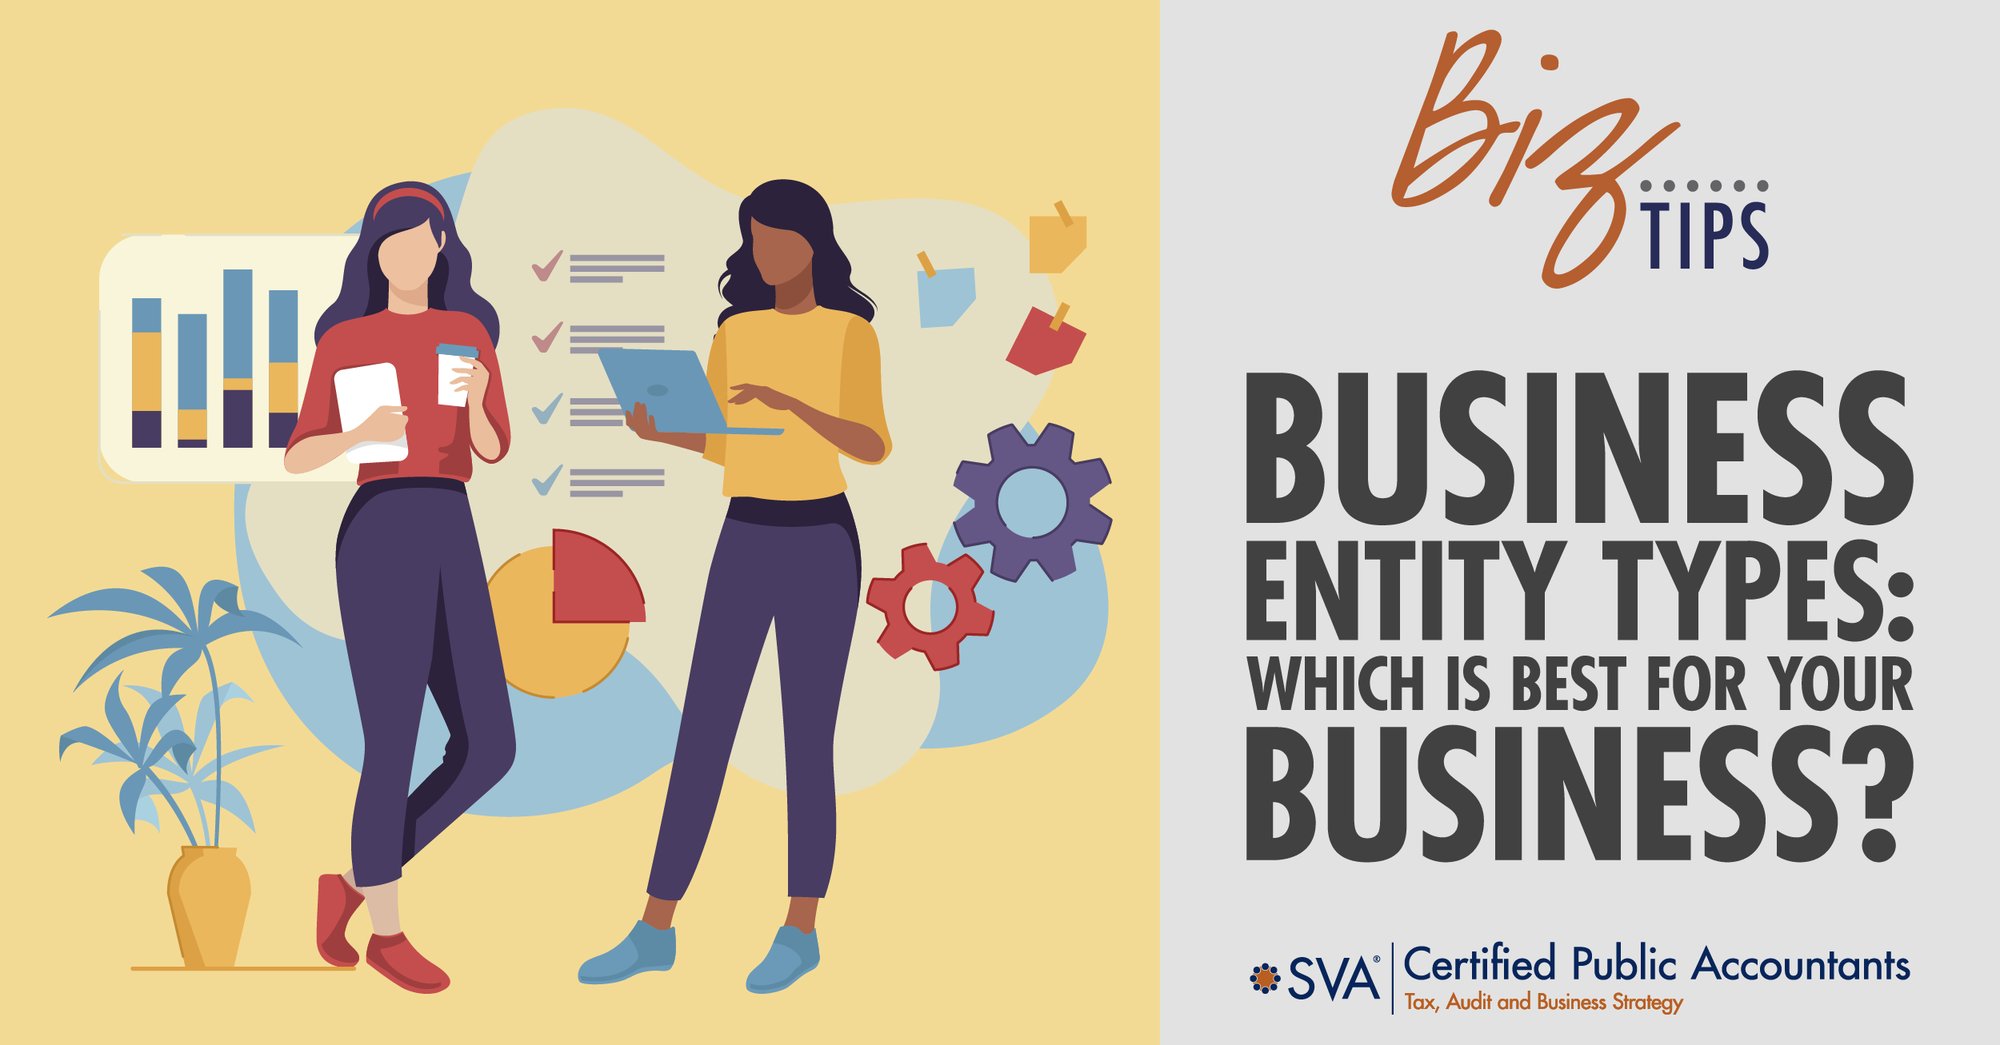 sva-certified-public-accountants-biz-tips-business-entity-types-which-is-best-for-your-business